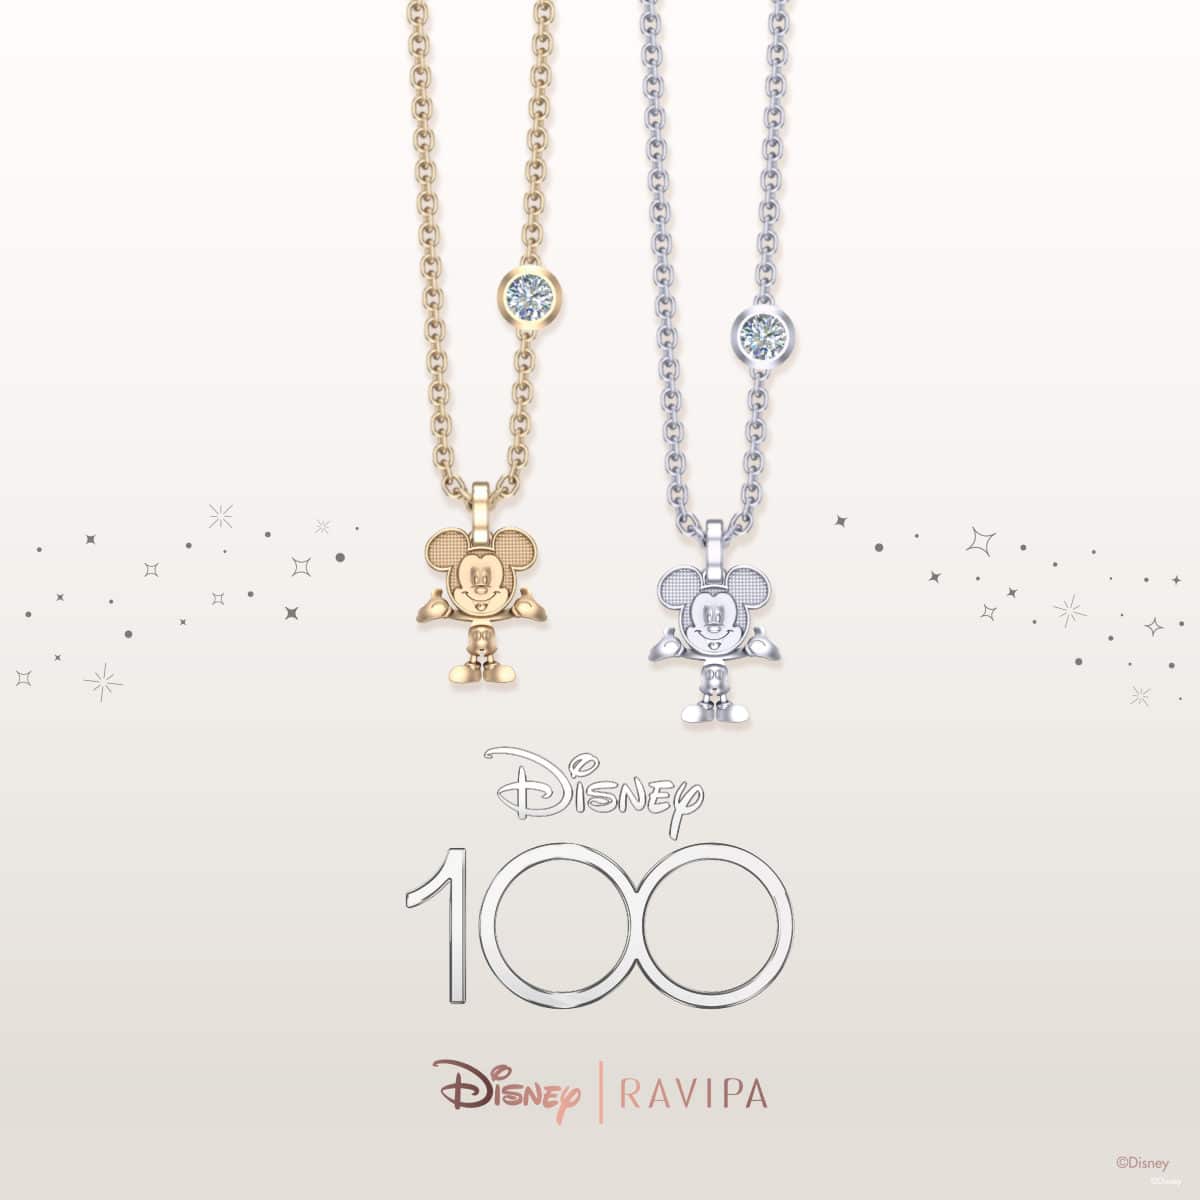 Disney100 special 100th anniversary collection Ravipa